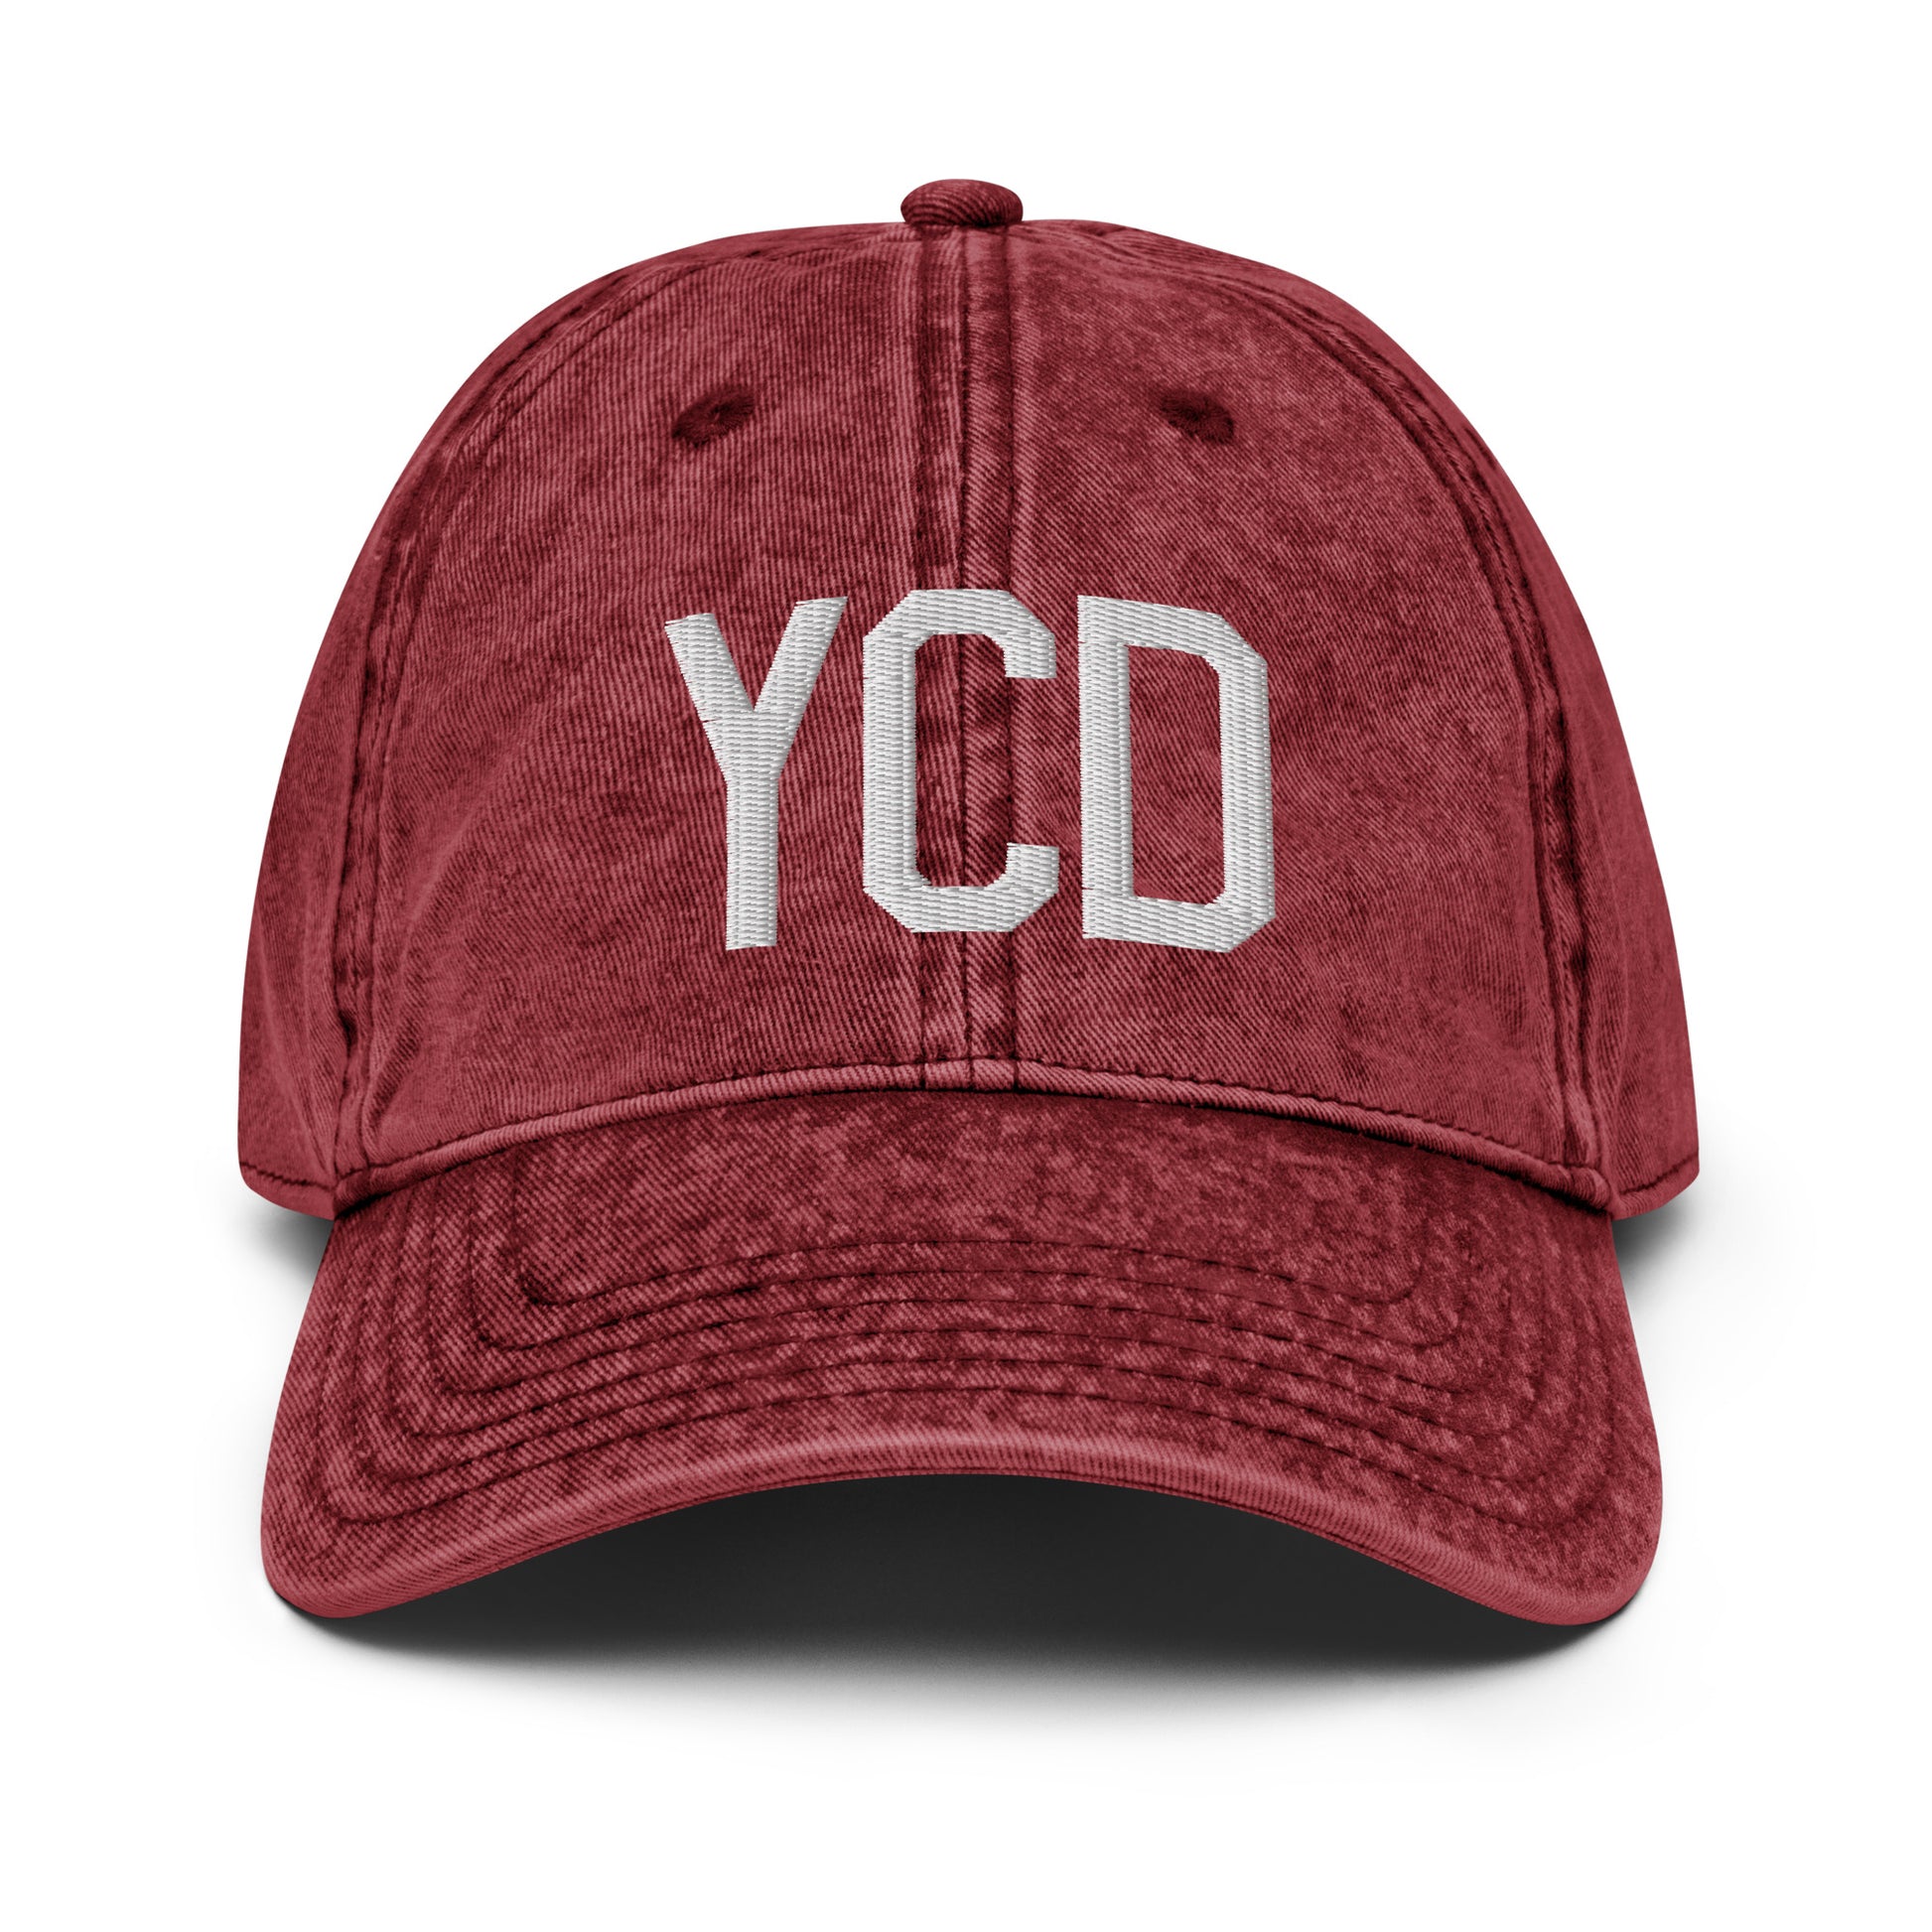 Airport Code Twill Cap - White • YCD Nanaimo • YHM Designs - Image 19